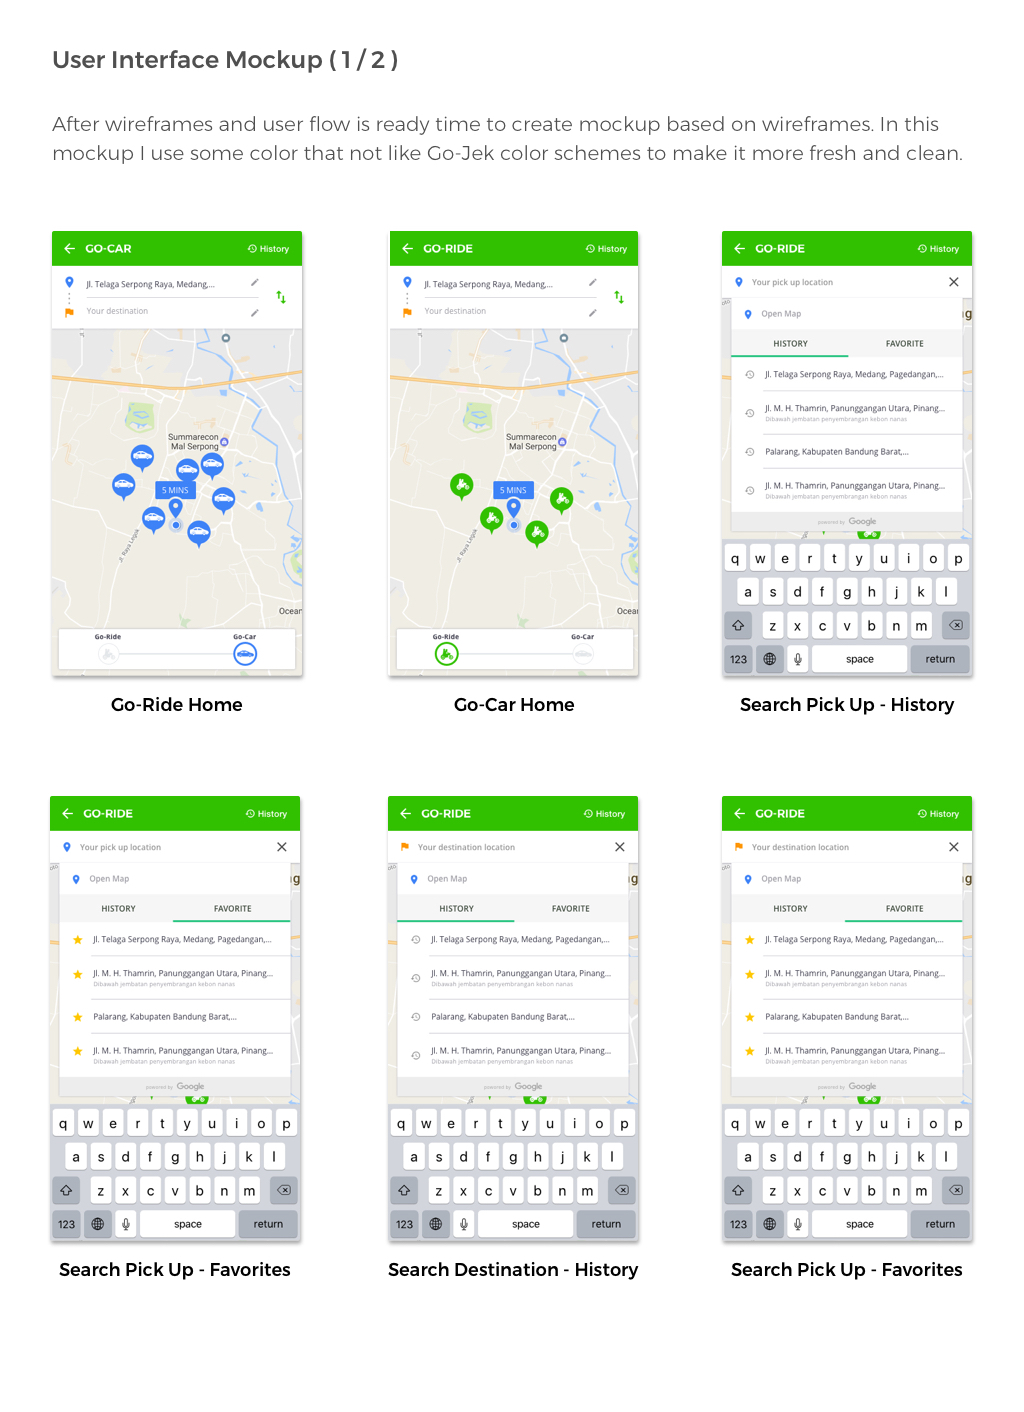 UIX UI user interface user experience UX Research research transportation taxi app gojek Uber